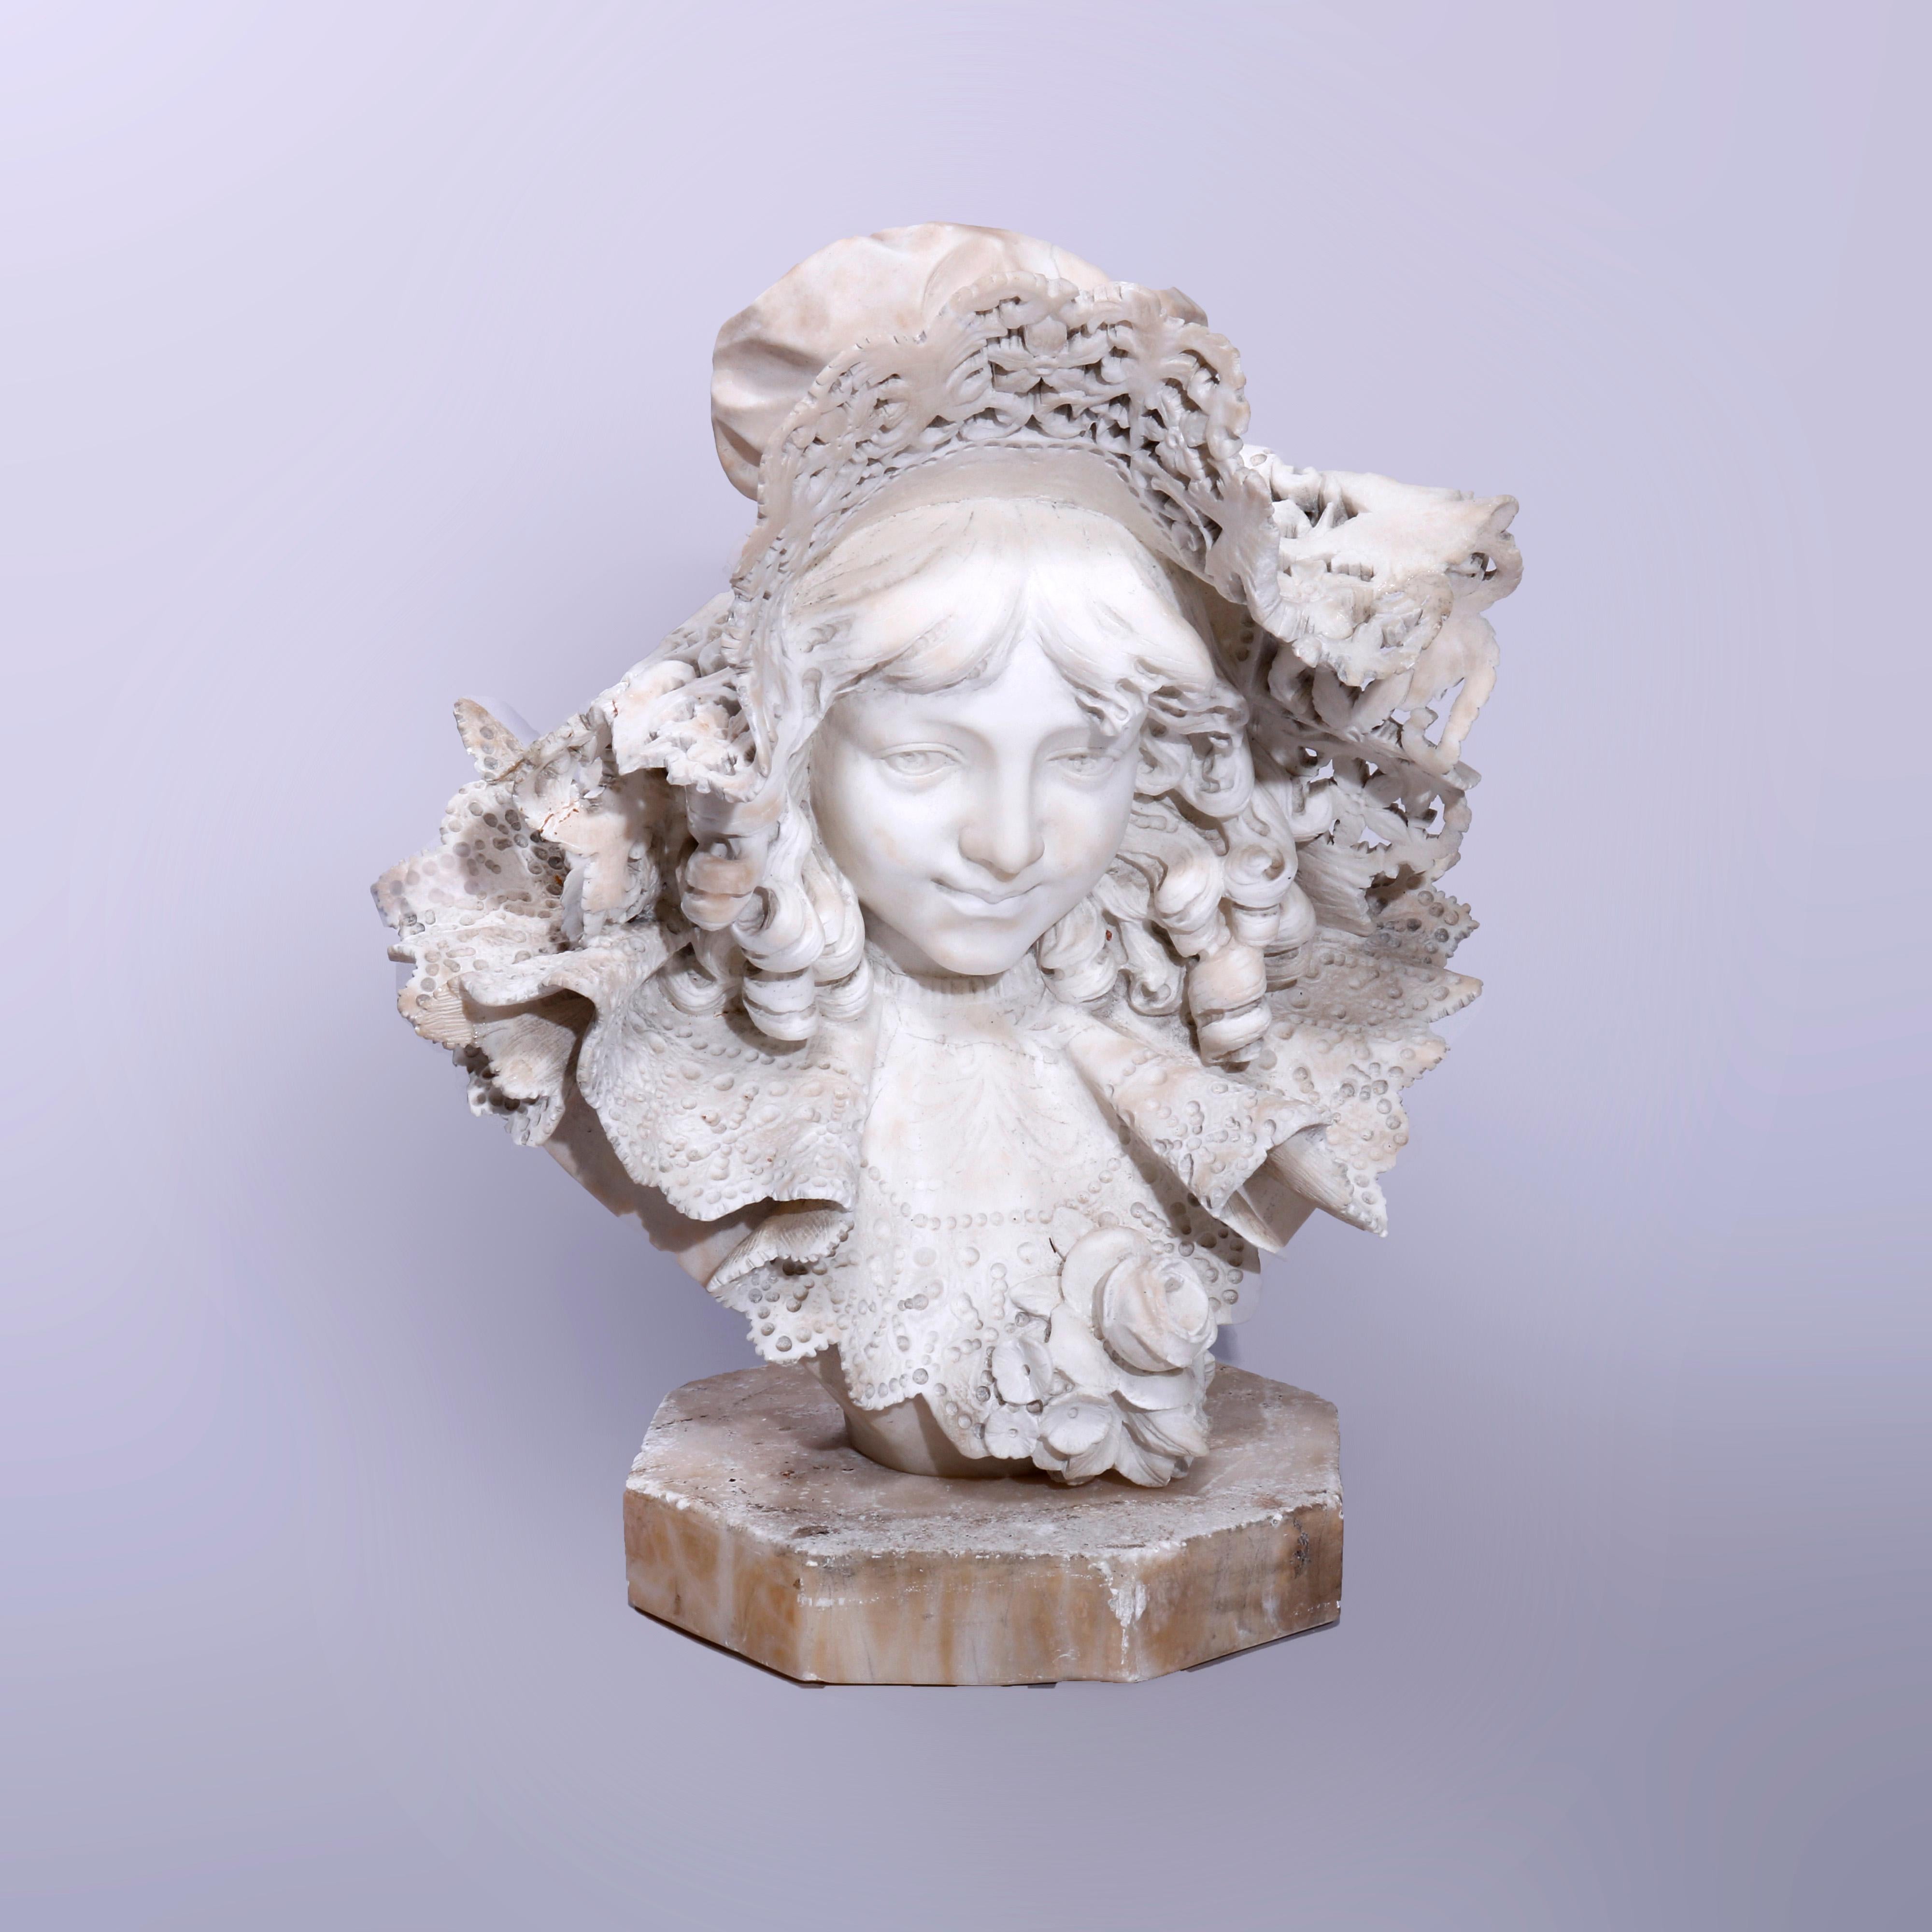 An antique Italian portrait sculpture offers carved marble bust of a young woman or girl in a ruffled lace bonnet, seated on base as photographed, c1890

Measures - overall 20''H x 15.5''W x 17.5''D; base only 2''H x 10''W x 10''D.

Catalogue Note: